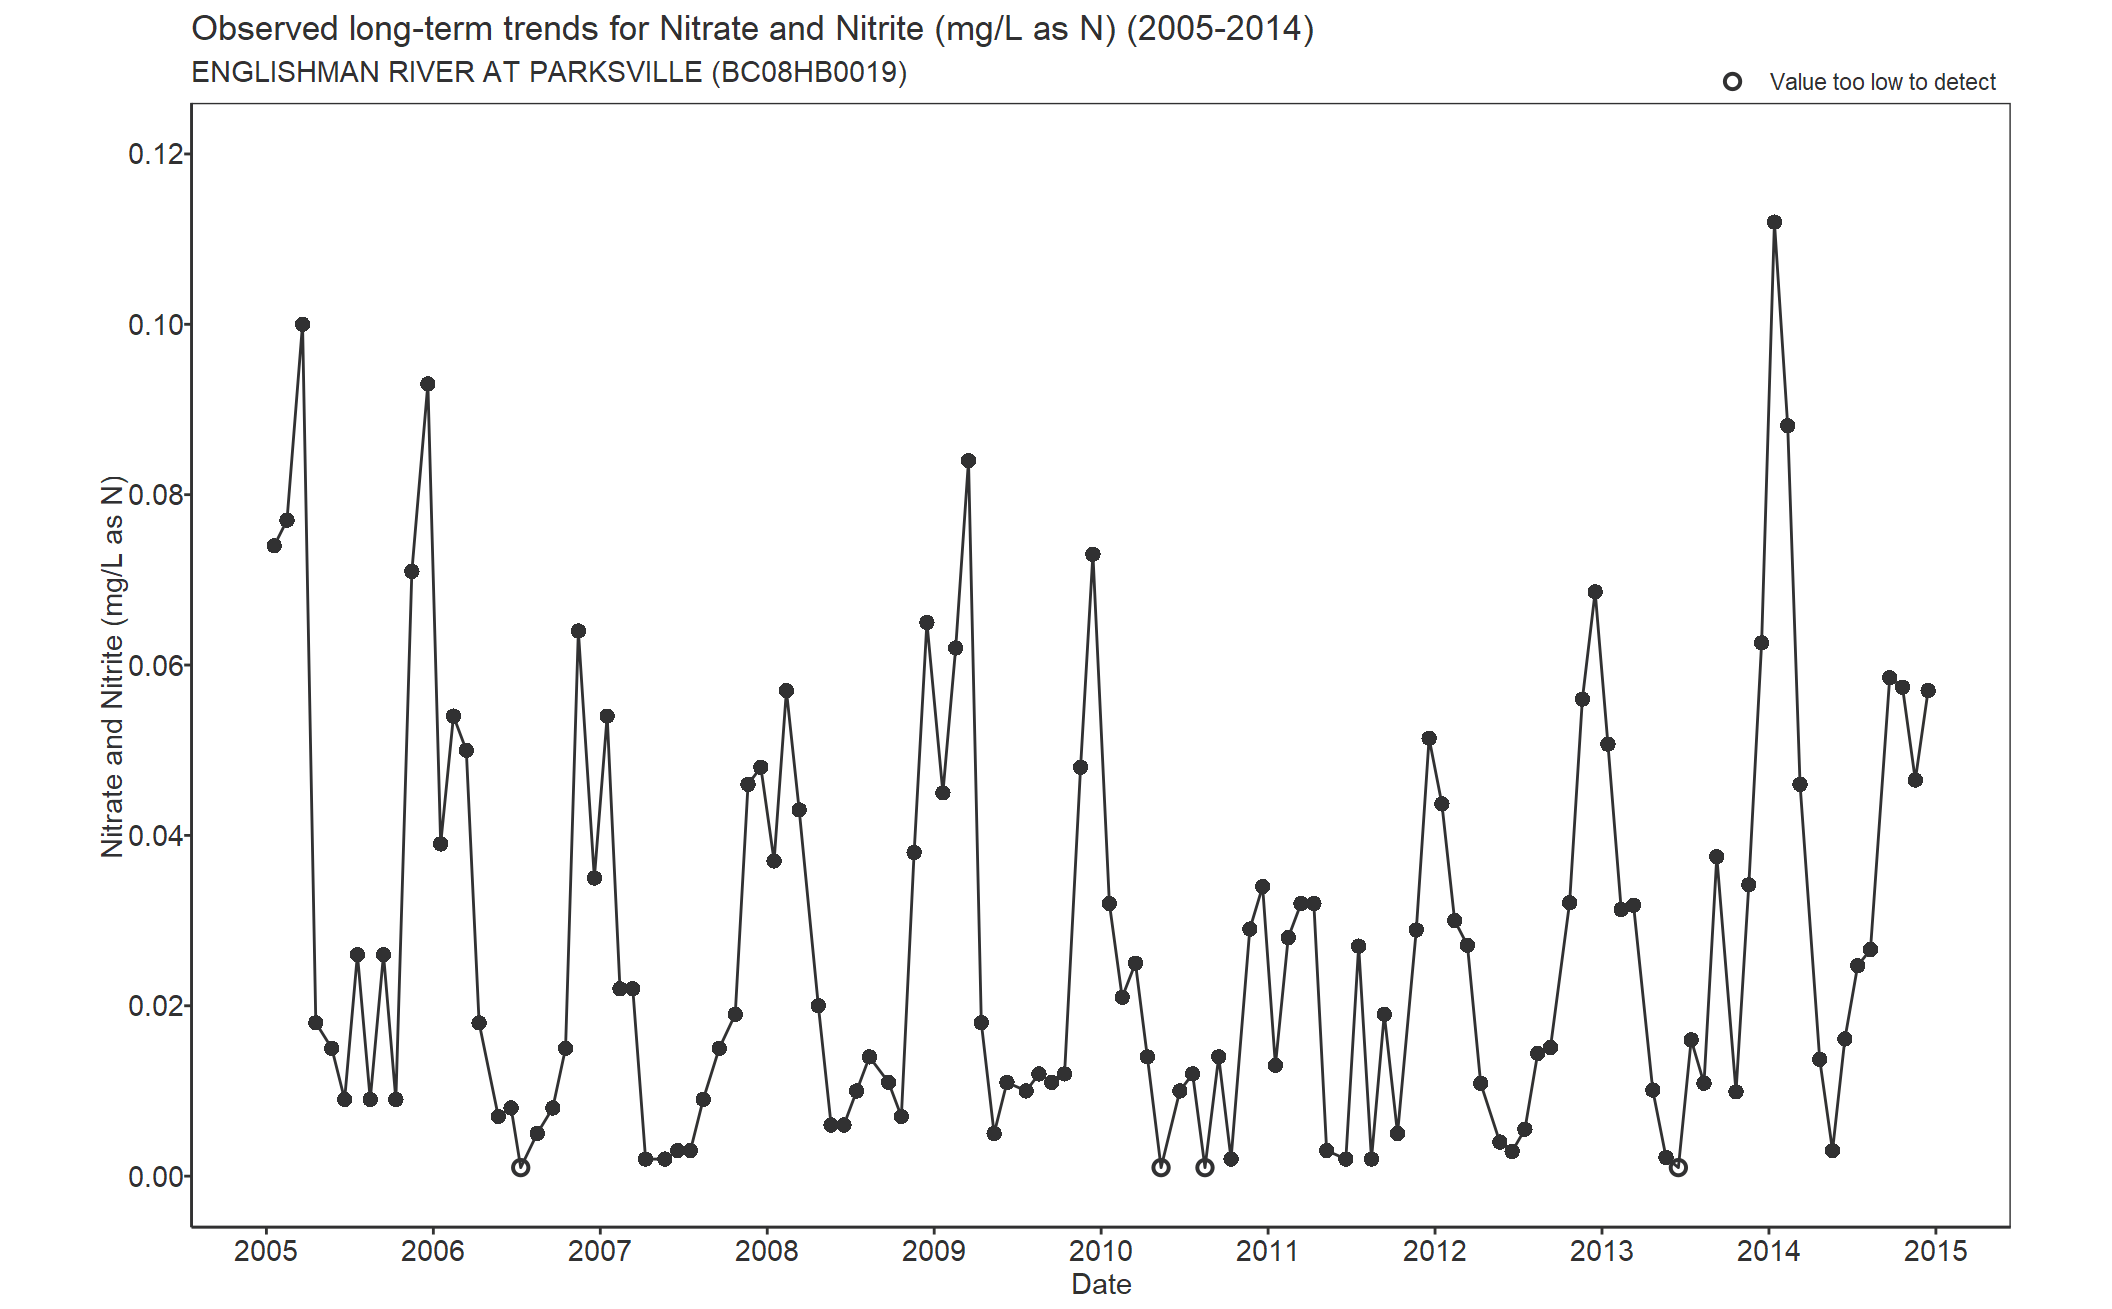 Observed long-term trends for Nitrate and Nitrite (2005-2014)